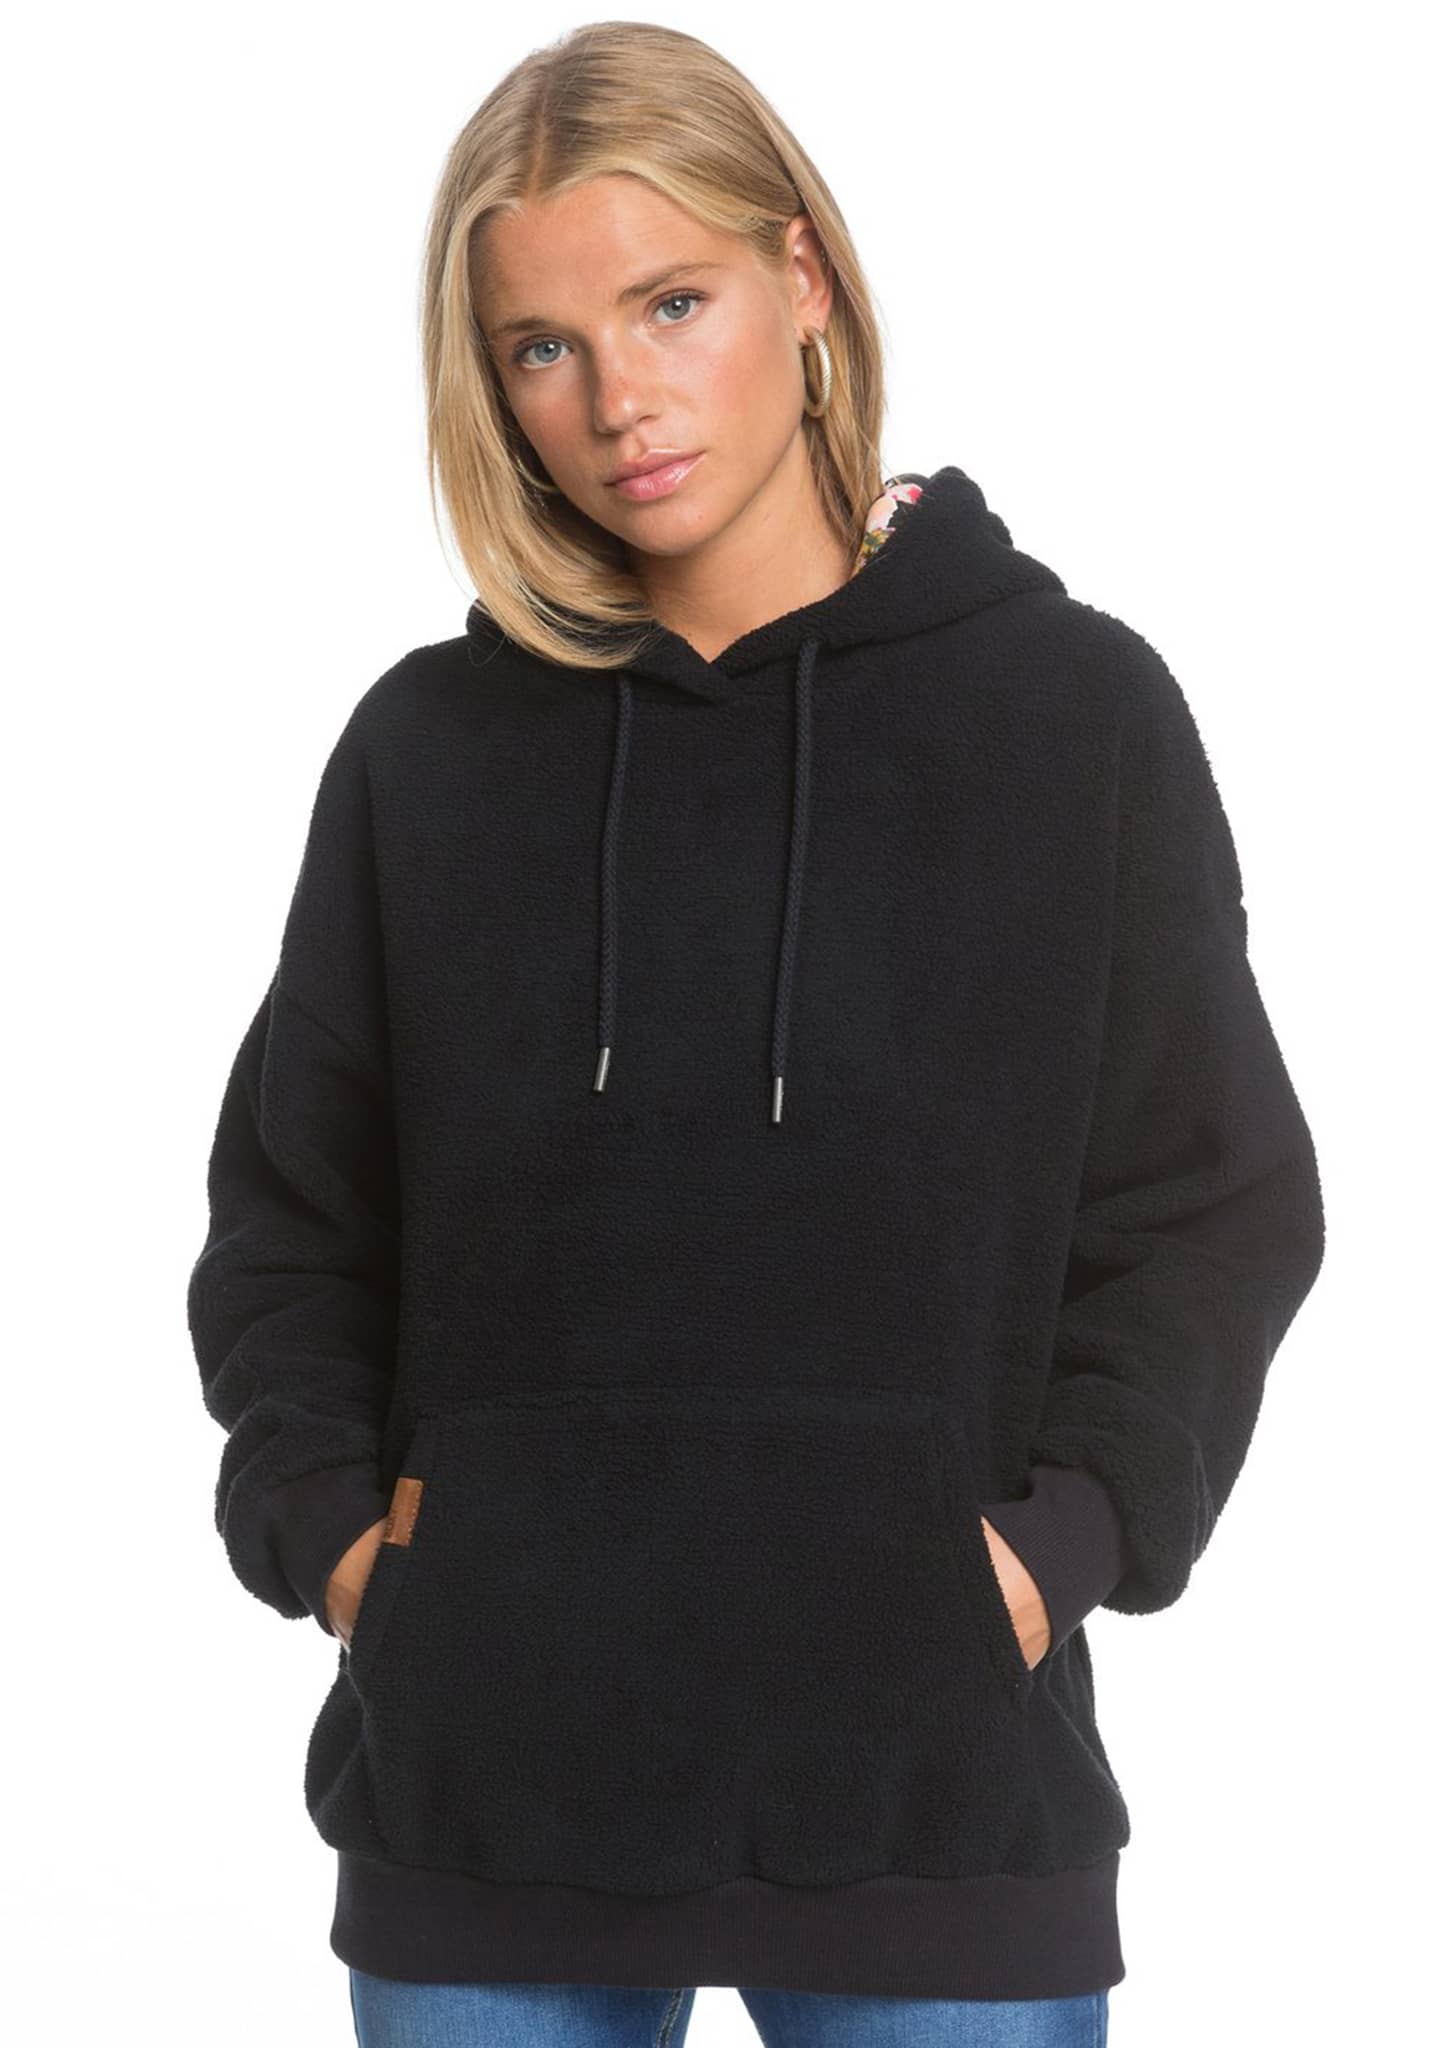 Roxy By The Lighthouse Hoodies black XL